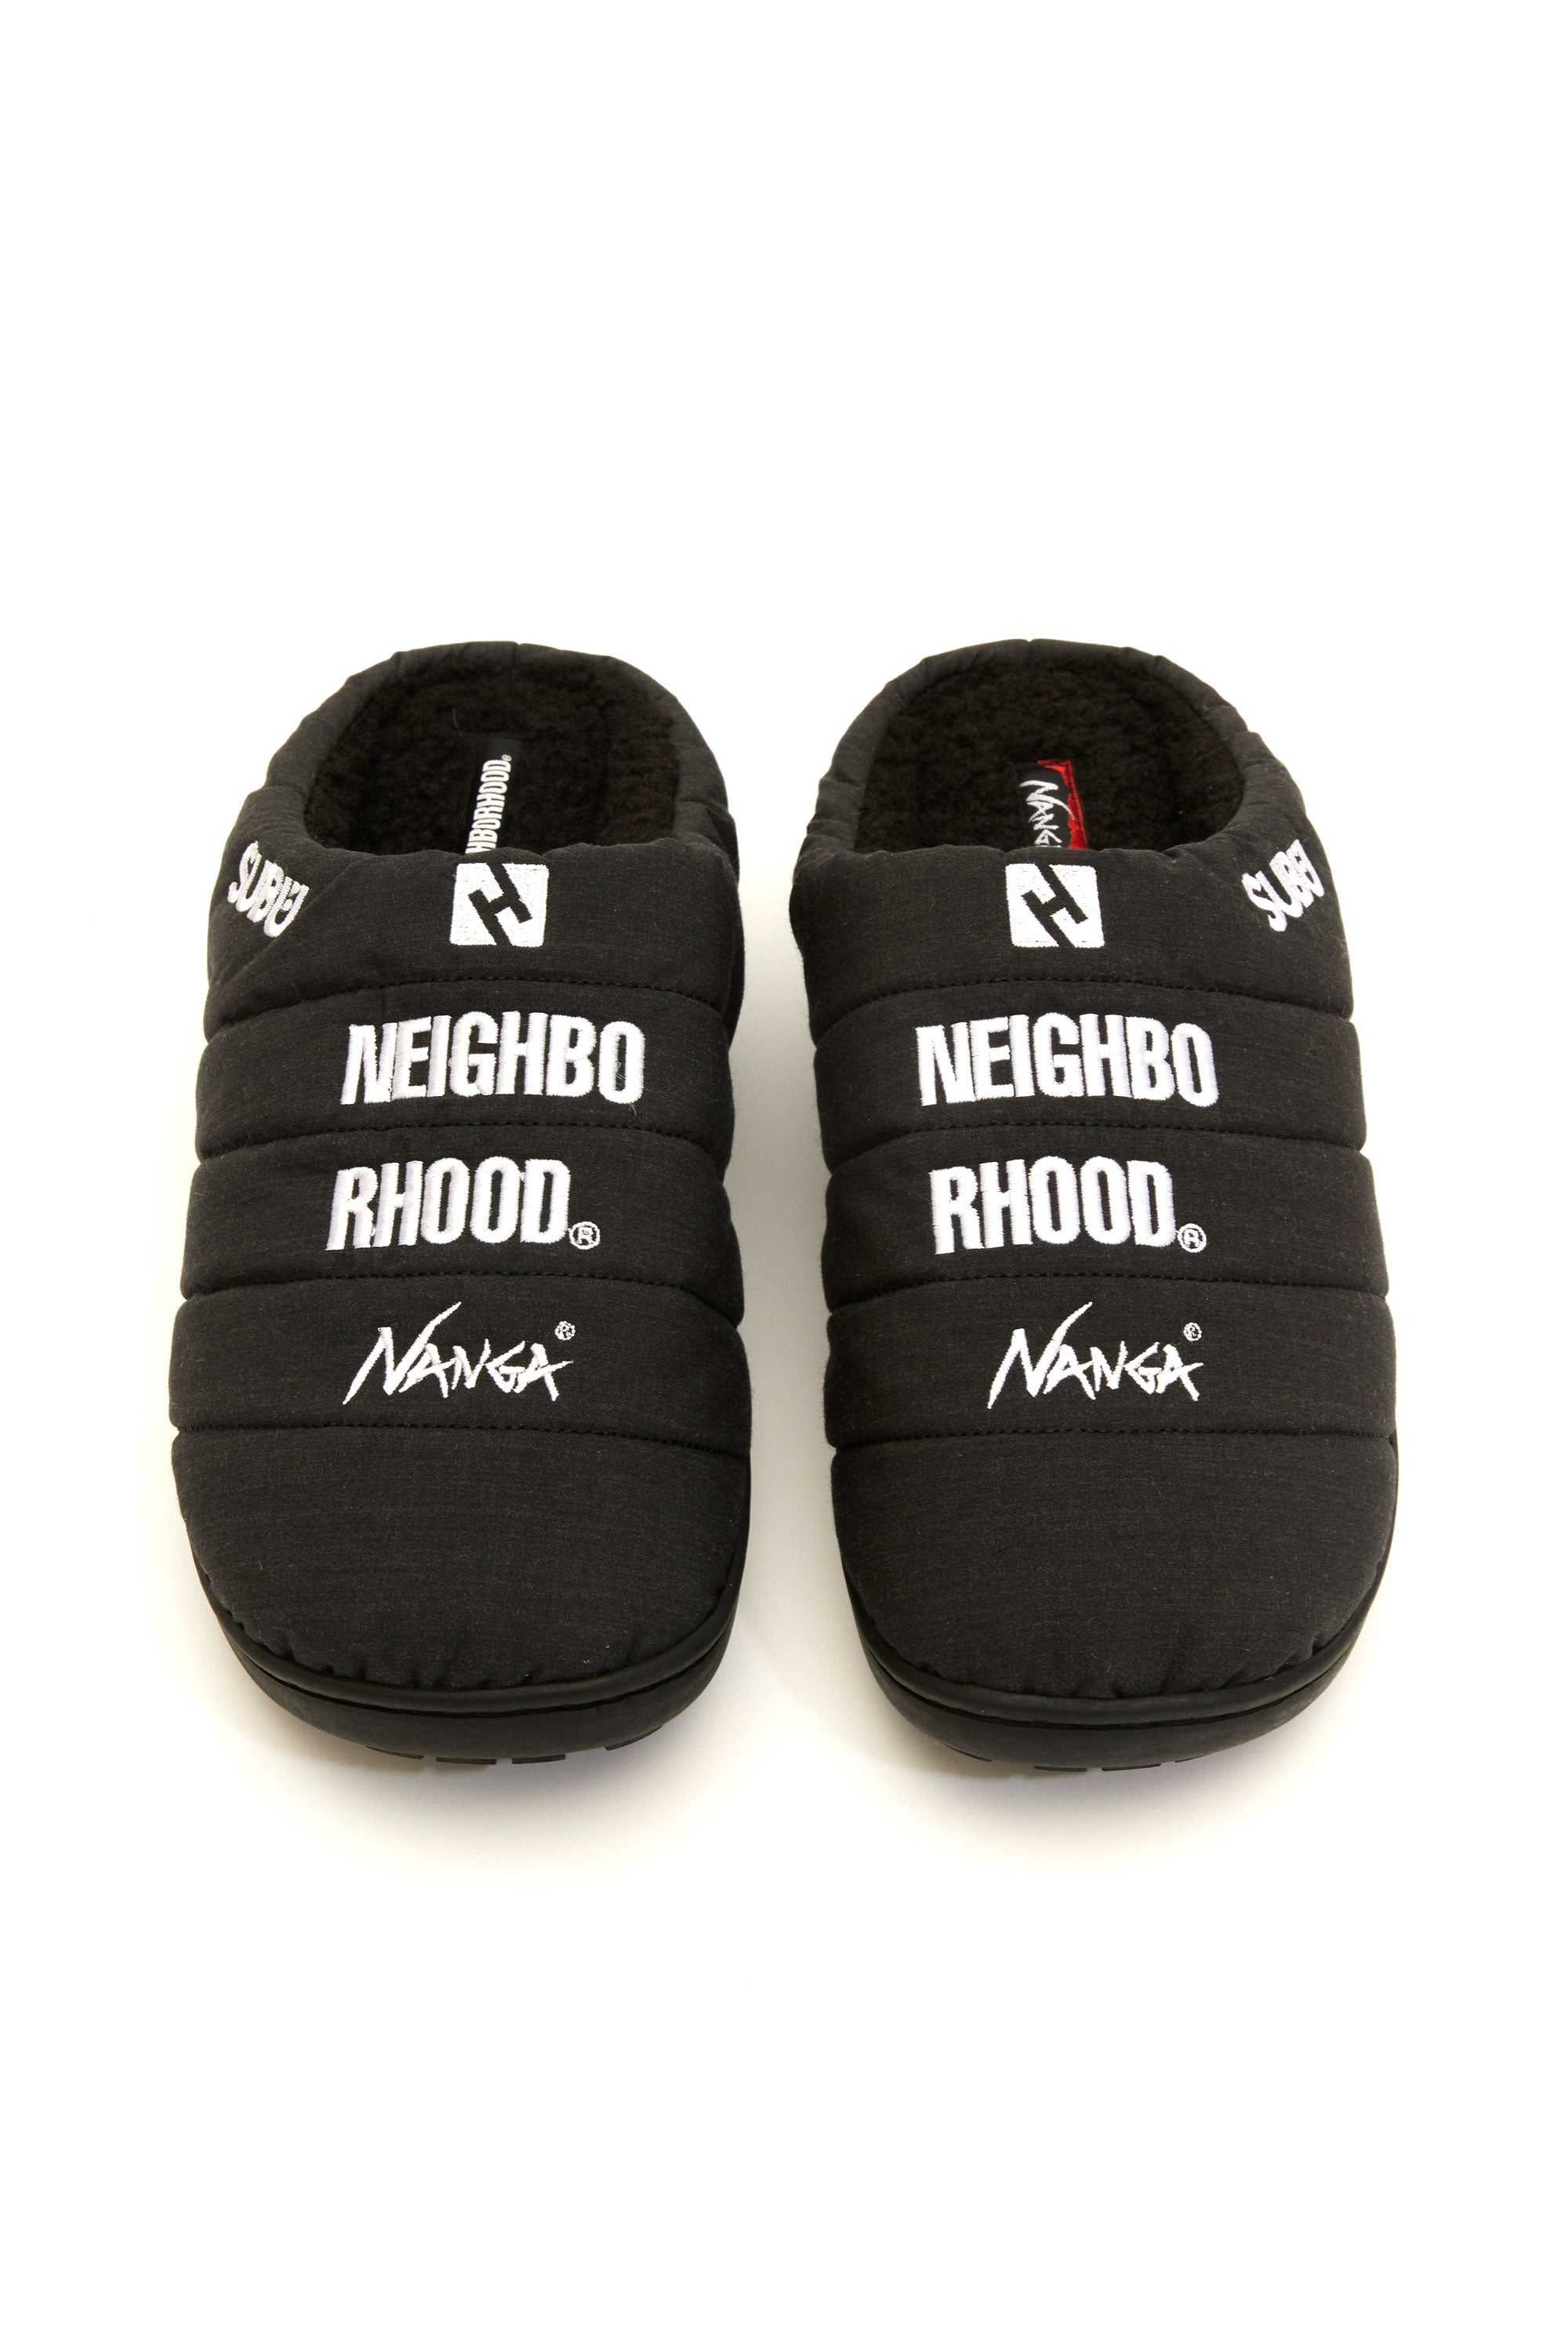 The NEIGHBORHOOD - NH X NANGA X SUBU TAKIBI SANDALS  available online with global shipping, and in PAM Stores Melbourne and Sydney.